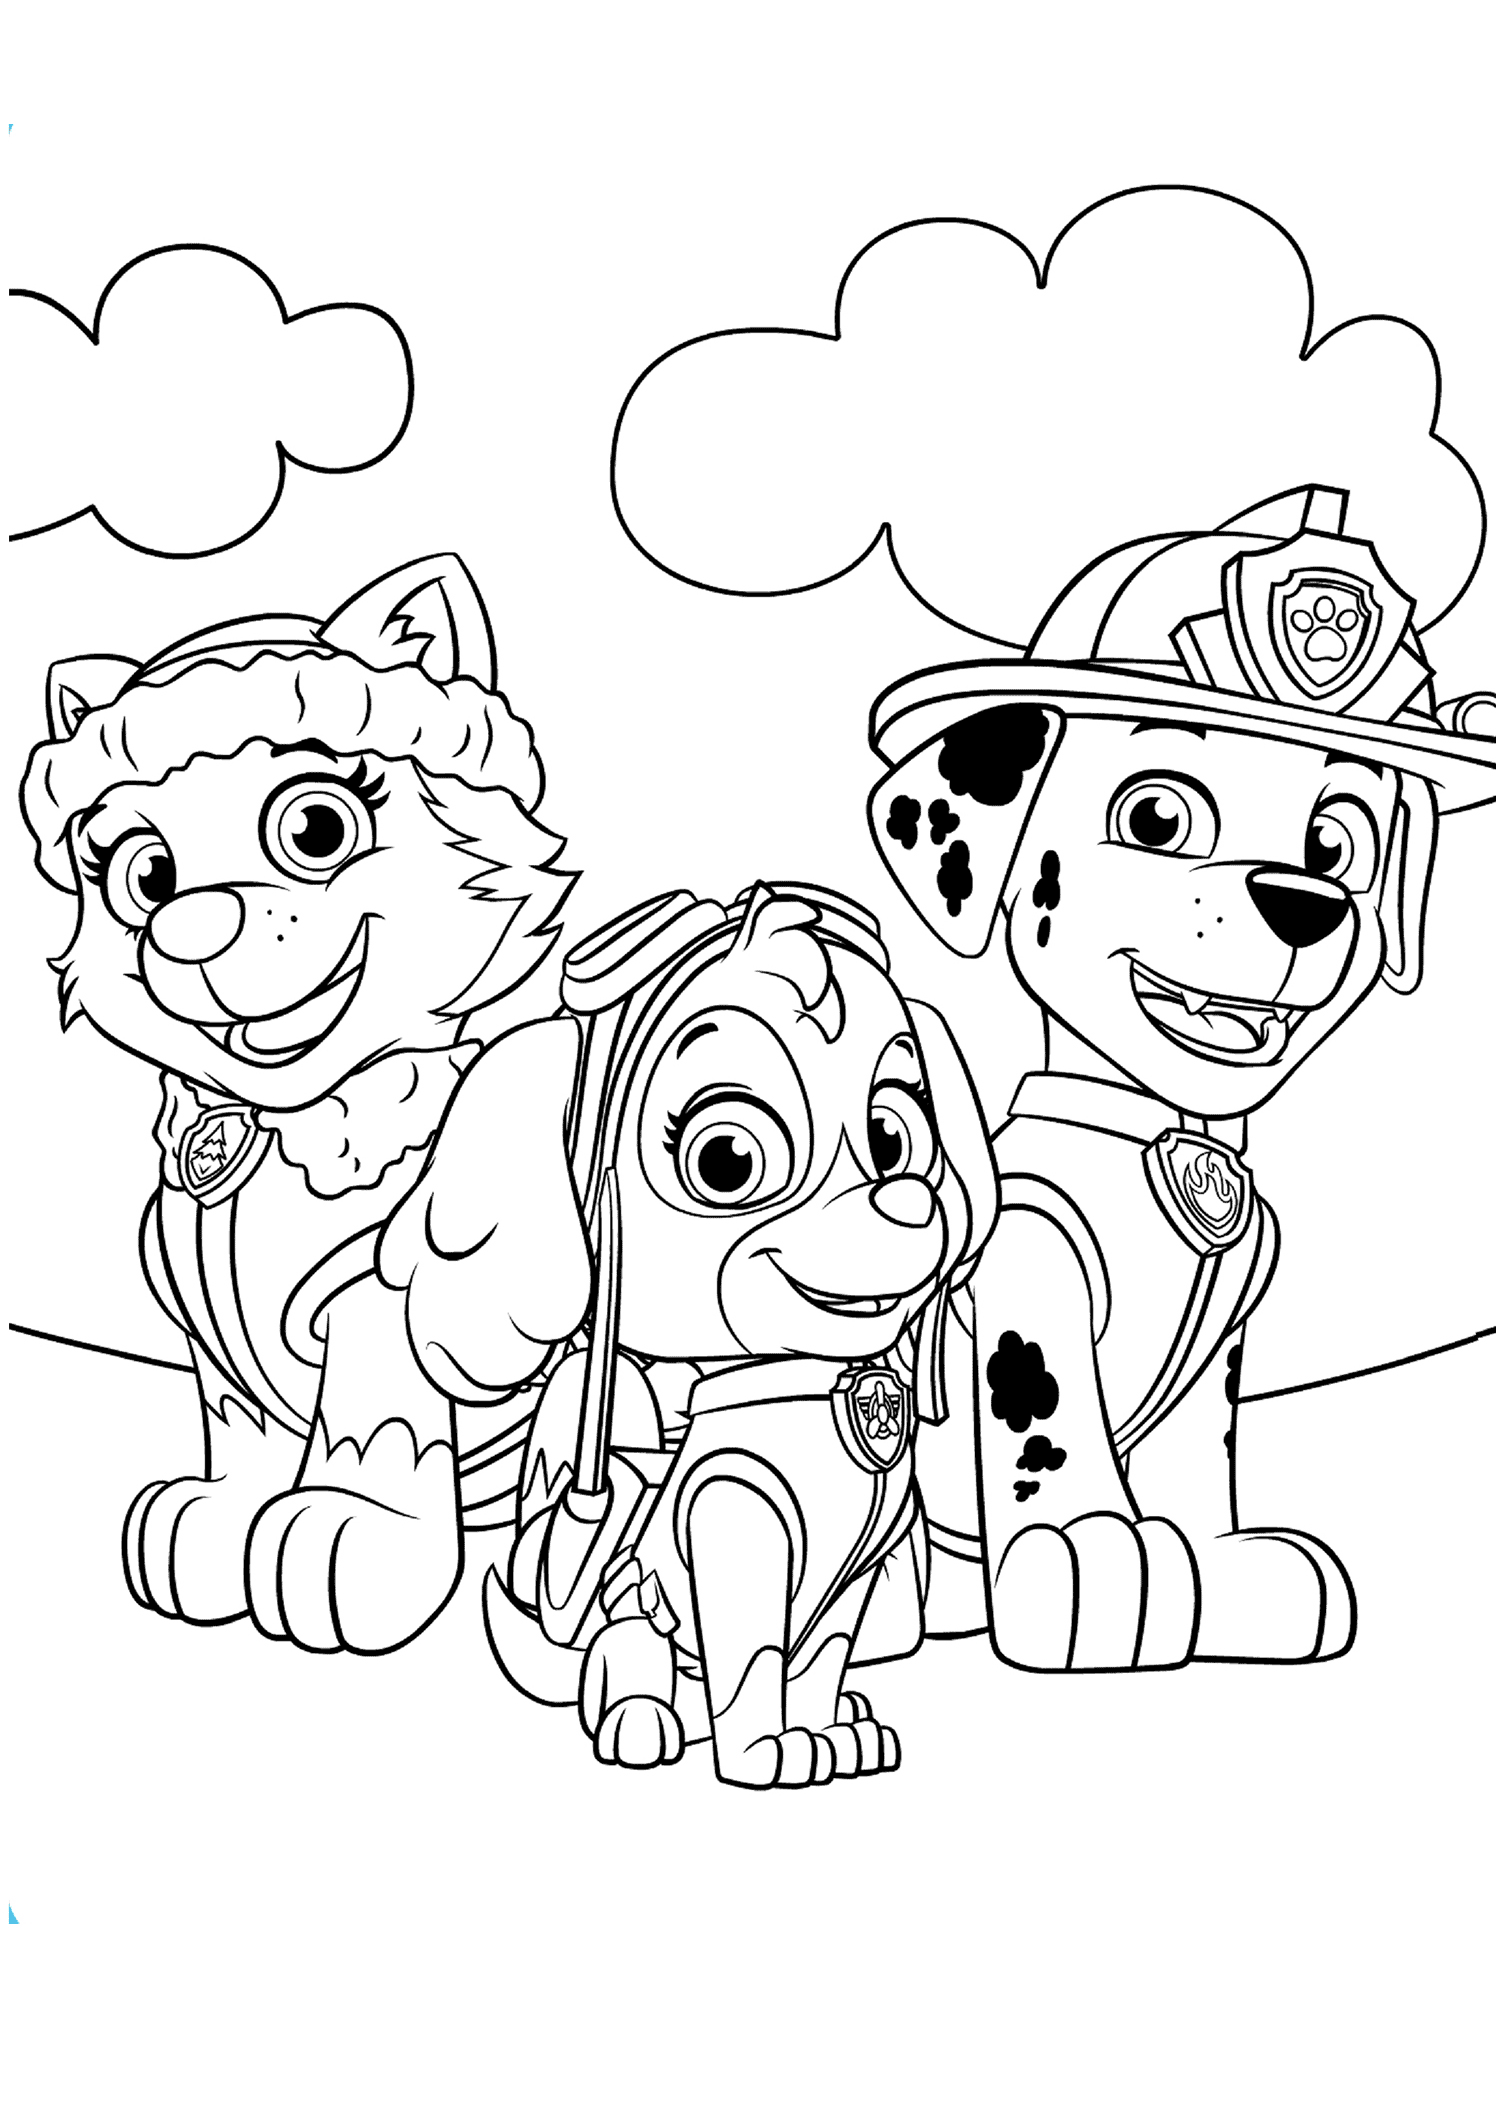 Click to see printable version of Everest, Marshall y Skye Coloring page